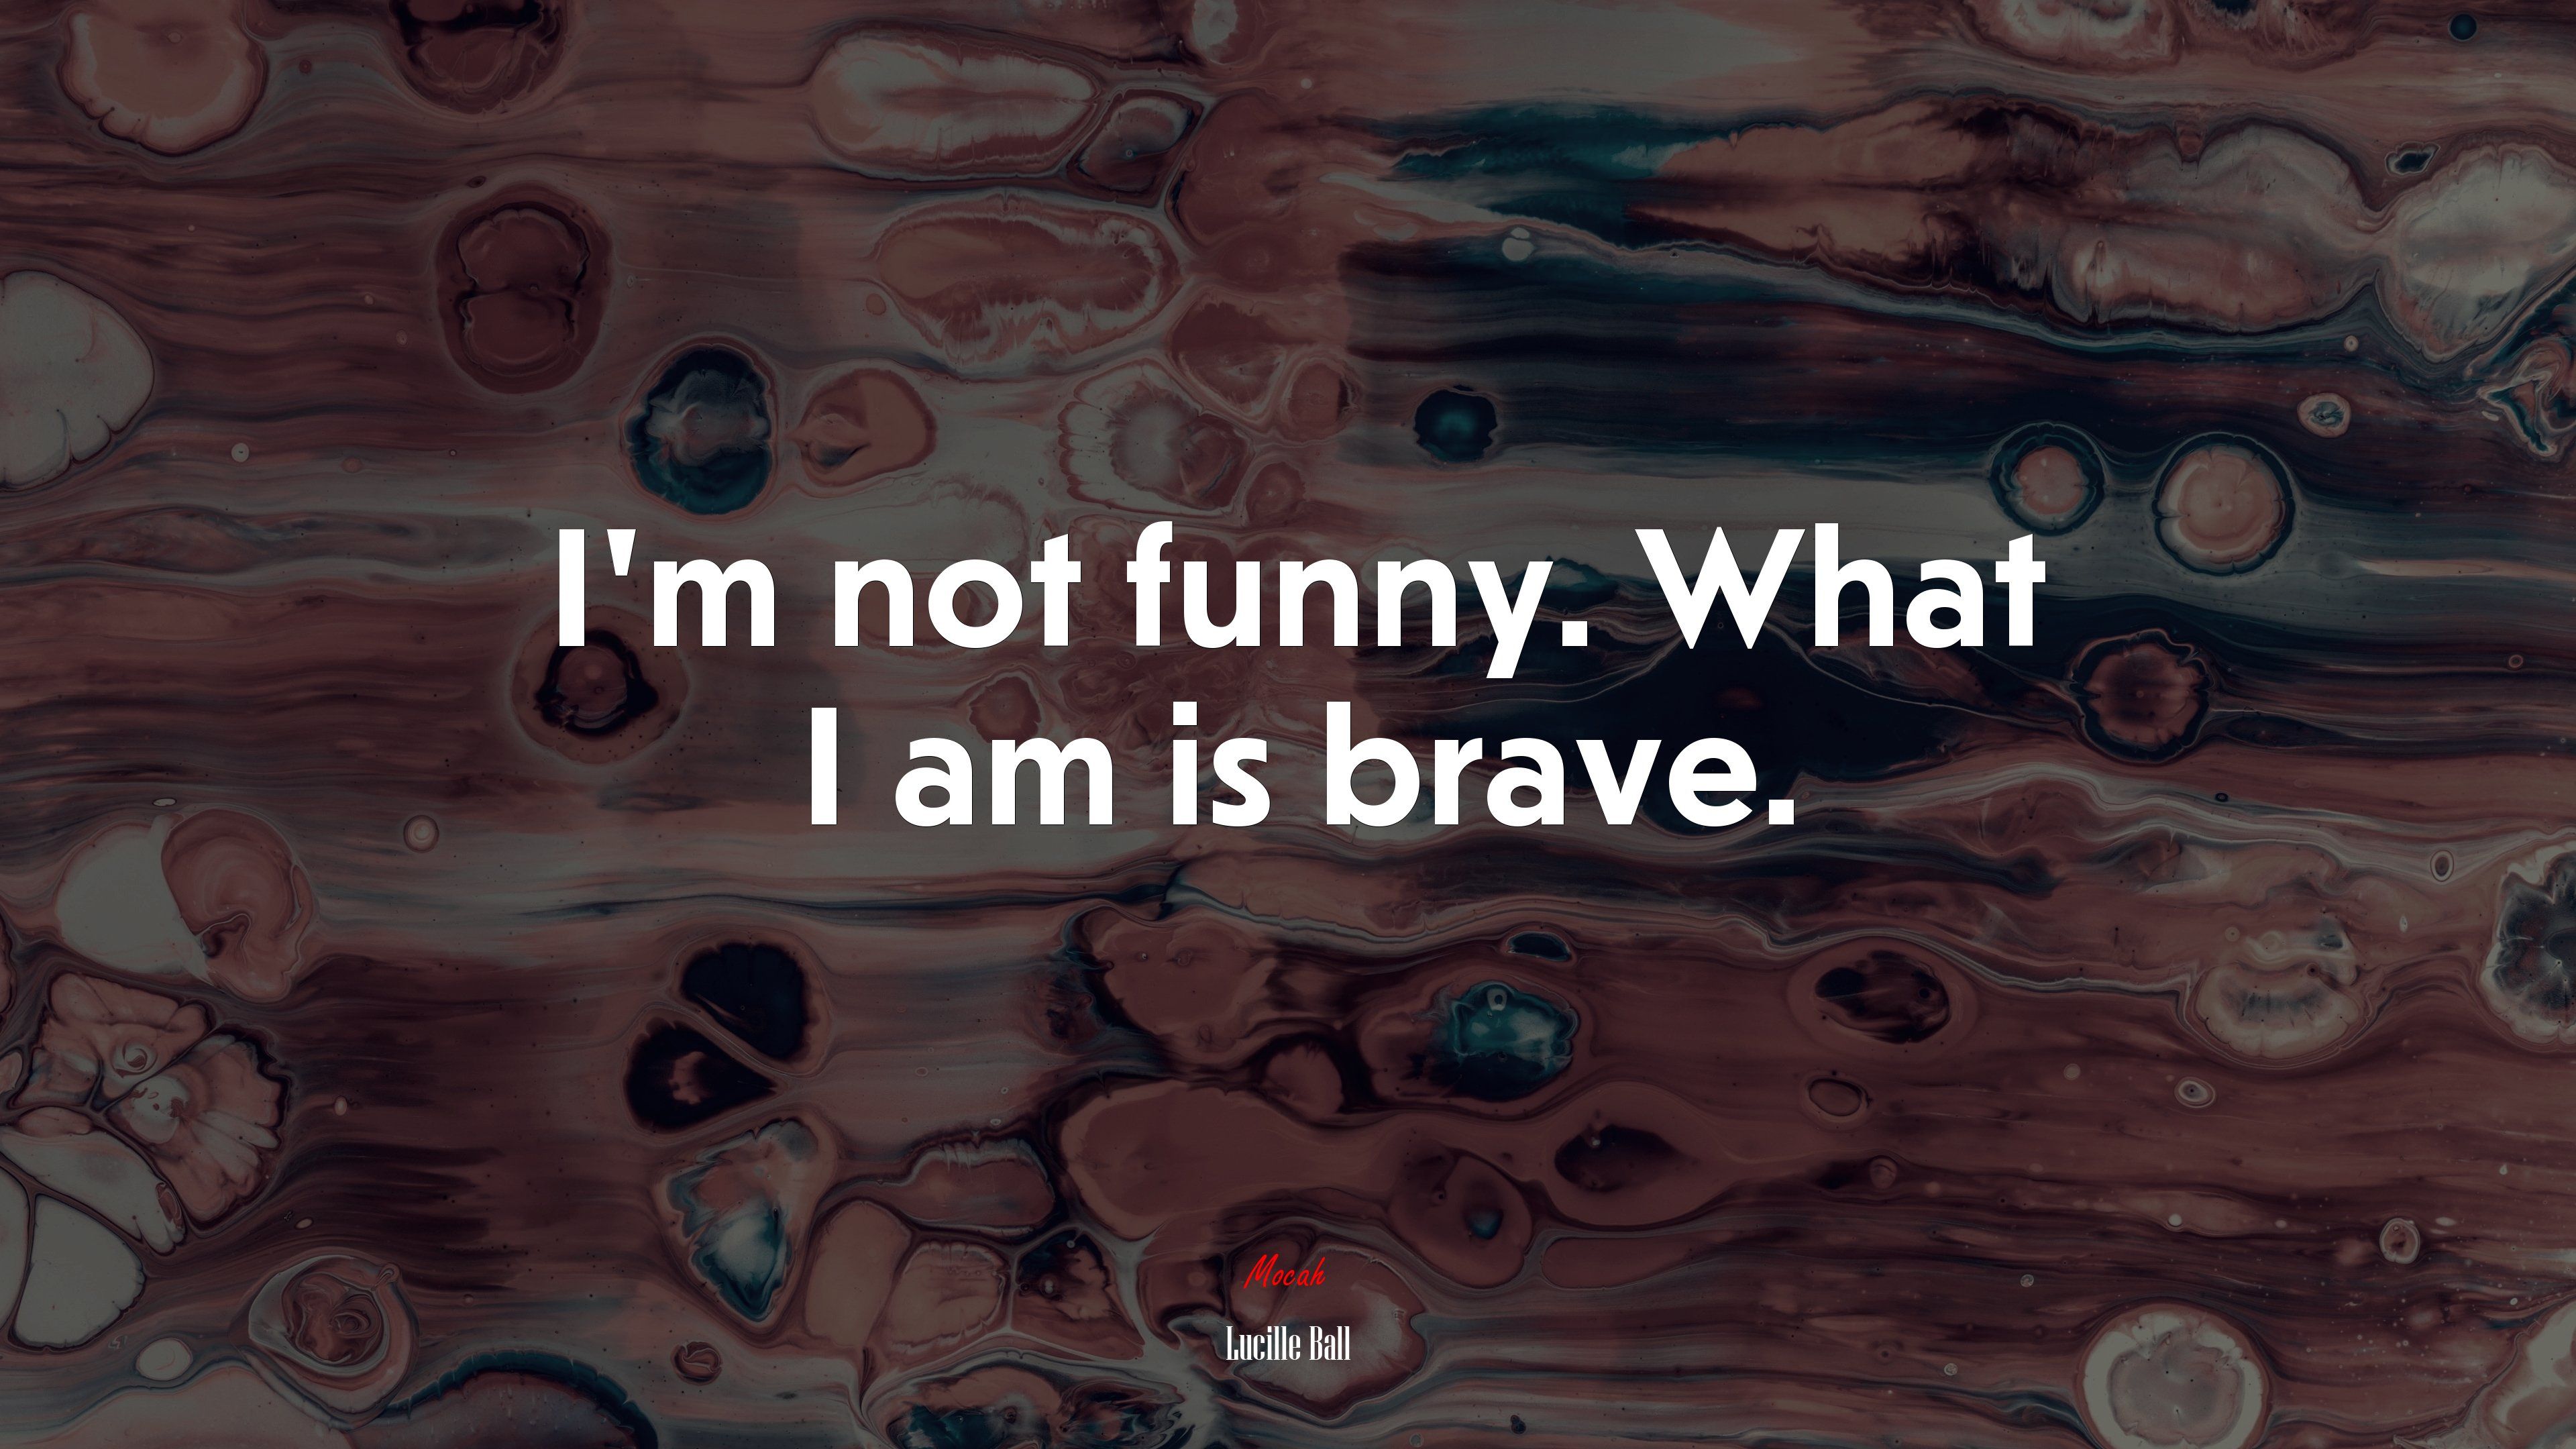 I'm not funny. What I am is brave. Lucille Ball quote, 4k wallpaper. Mocah.org HD Desktop Wallpaper